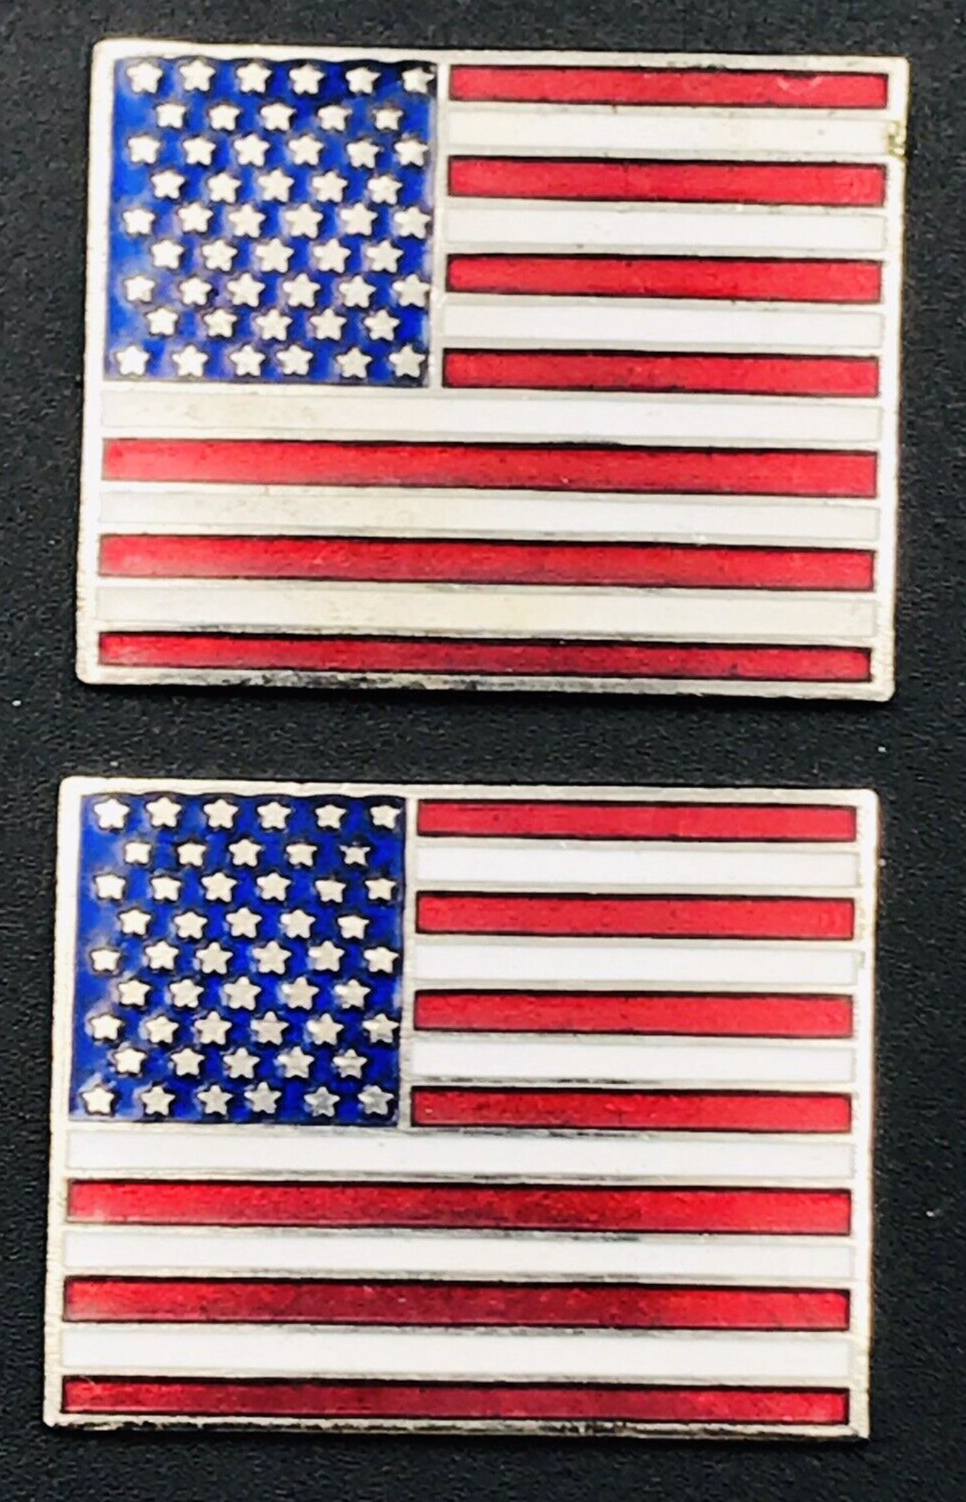 Primary image for Two (2) Silver Tone USA American Flag Metal Emblem Badge New 1.25" x 1"